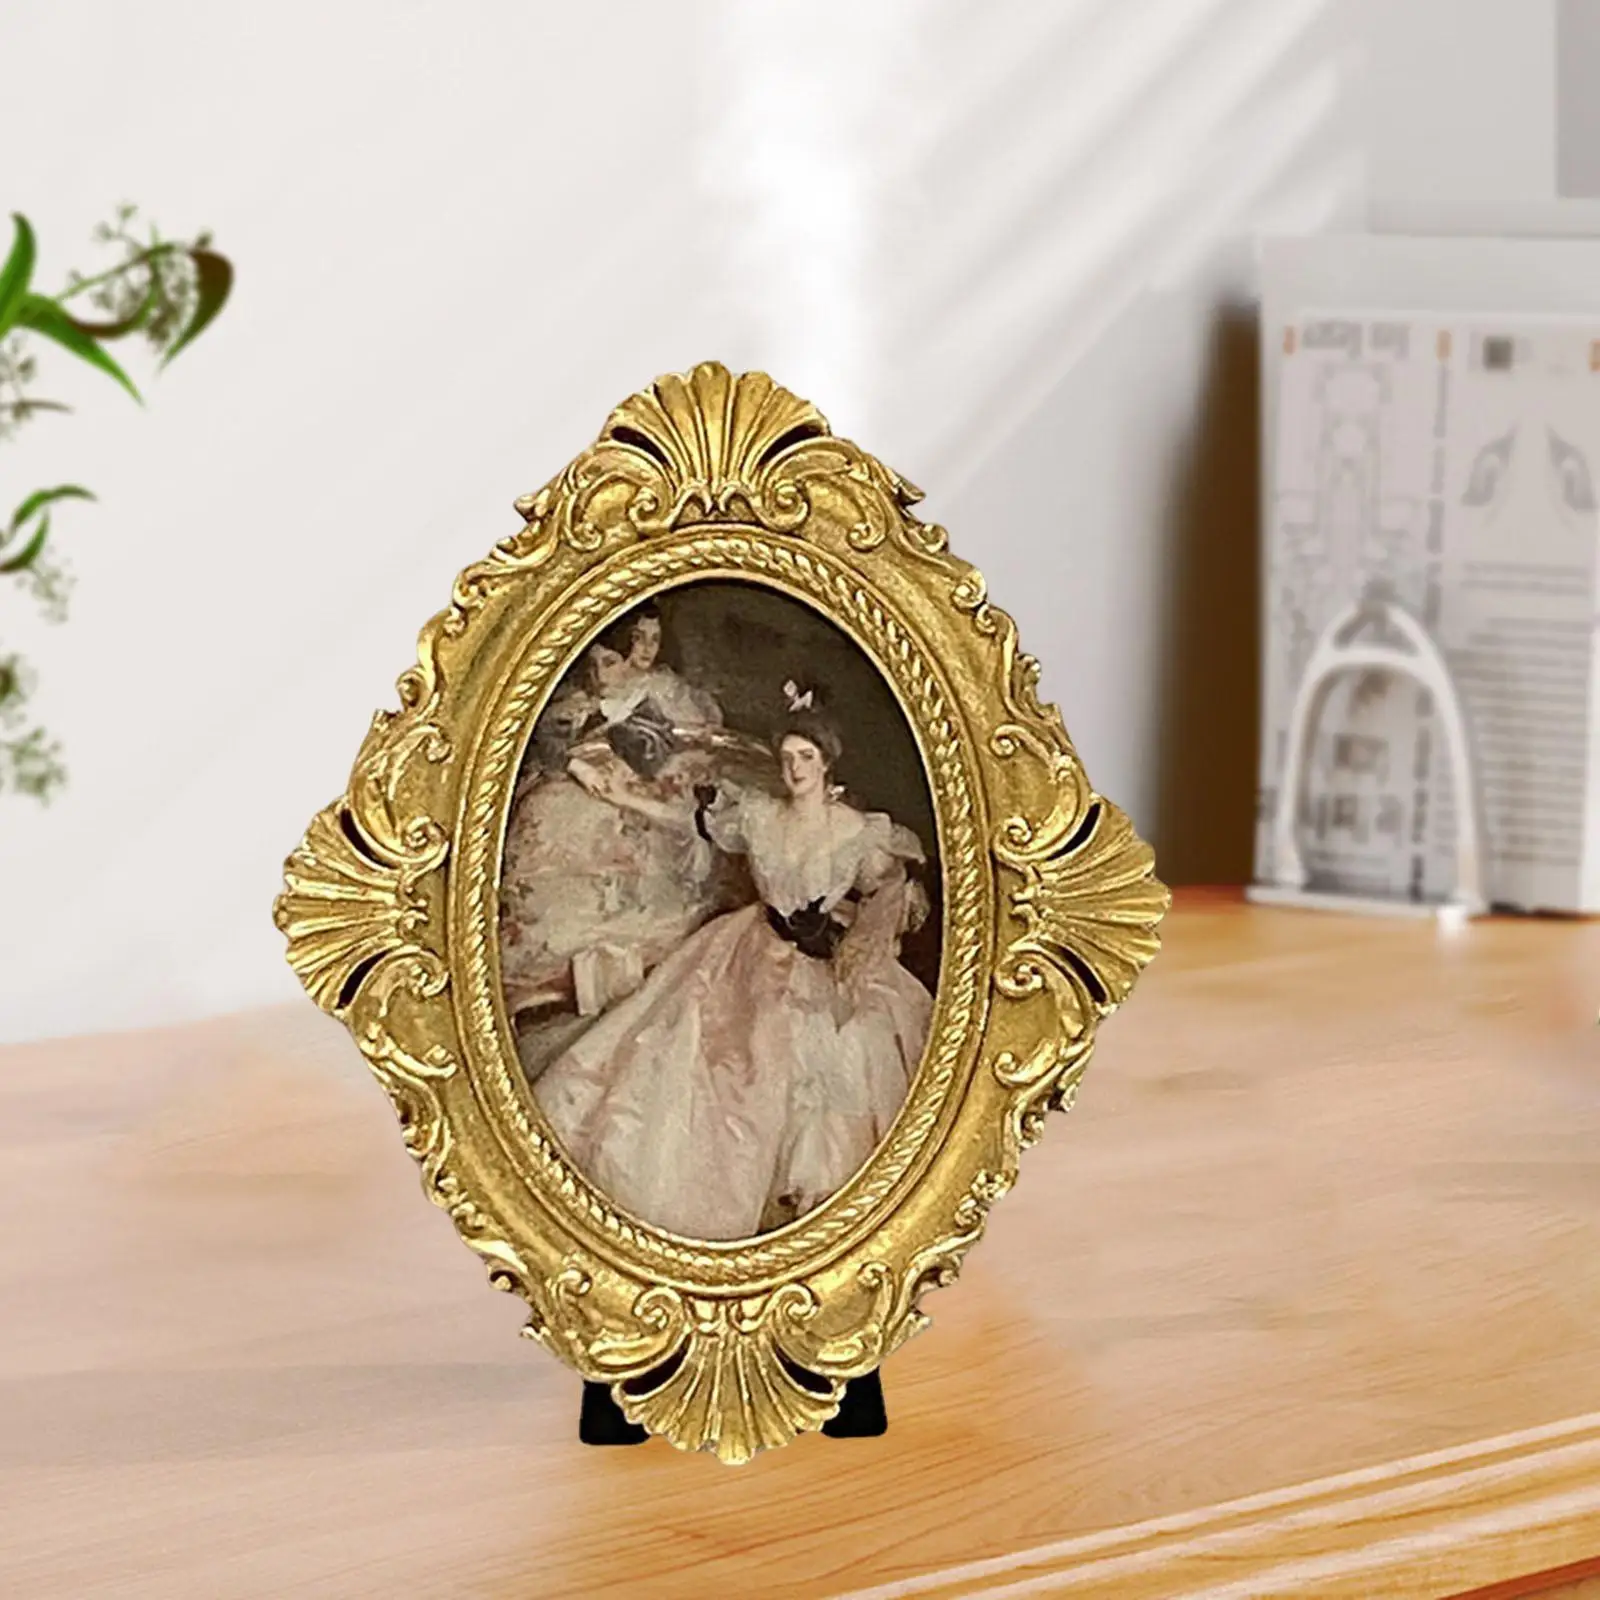 Resin Photo Frame, Wall Decor Ornament Gold Decorative Vintage Style Picture Frame for Dorm Anniversary Cafe Office Gift